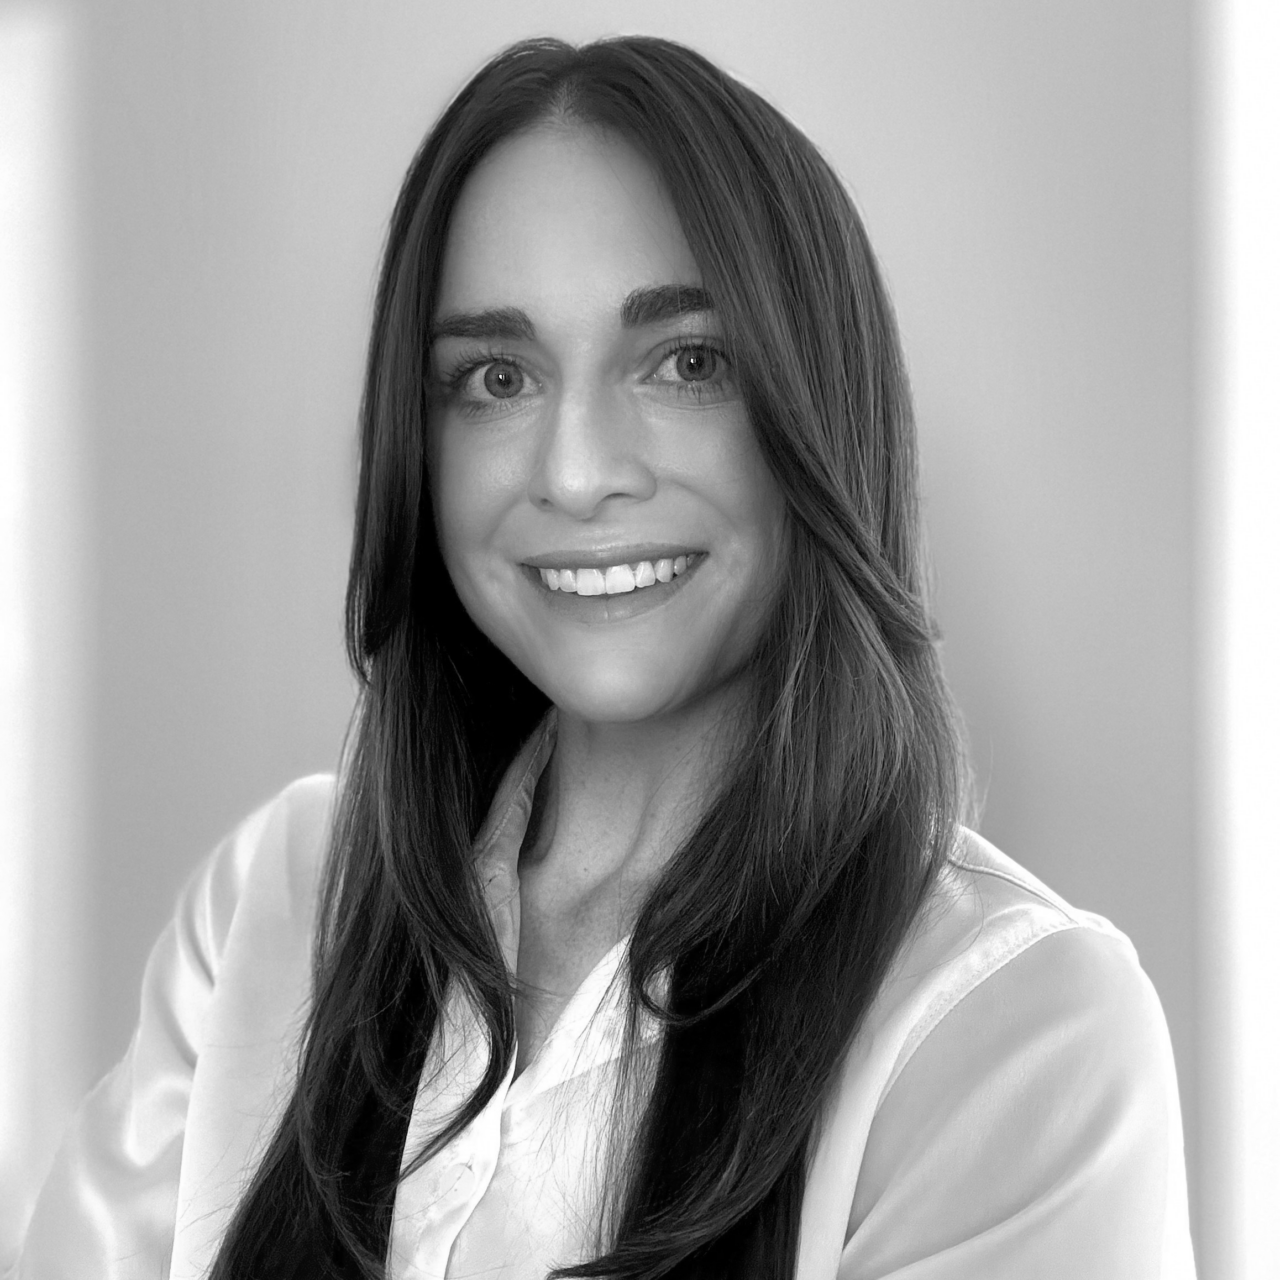 A woman with long dark hair wearing a white shirt is smiling at the camera in a black and white portrait.